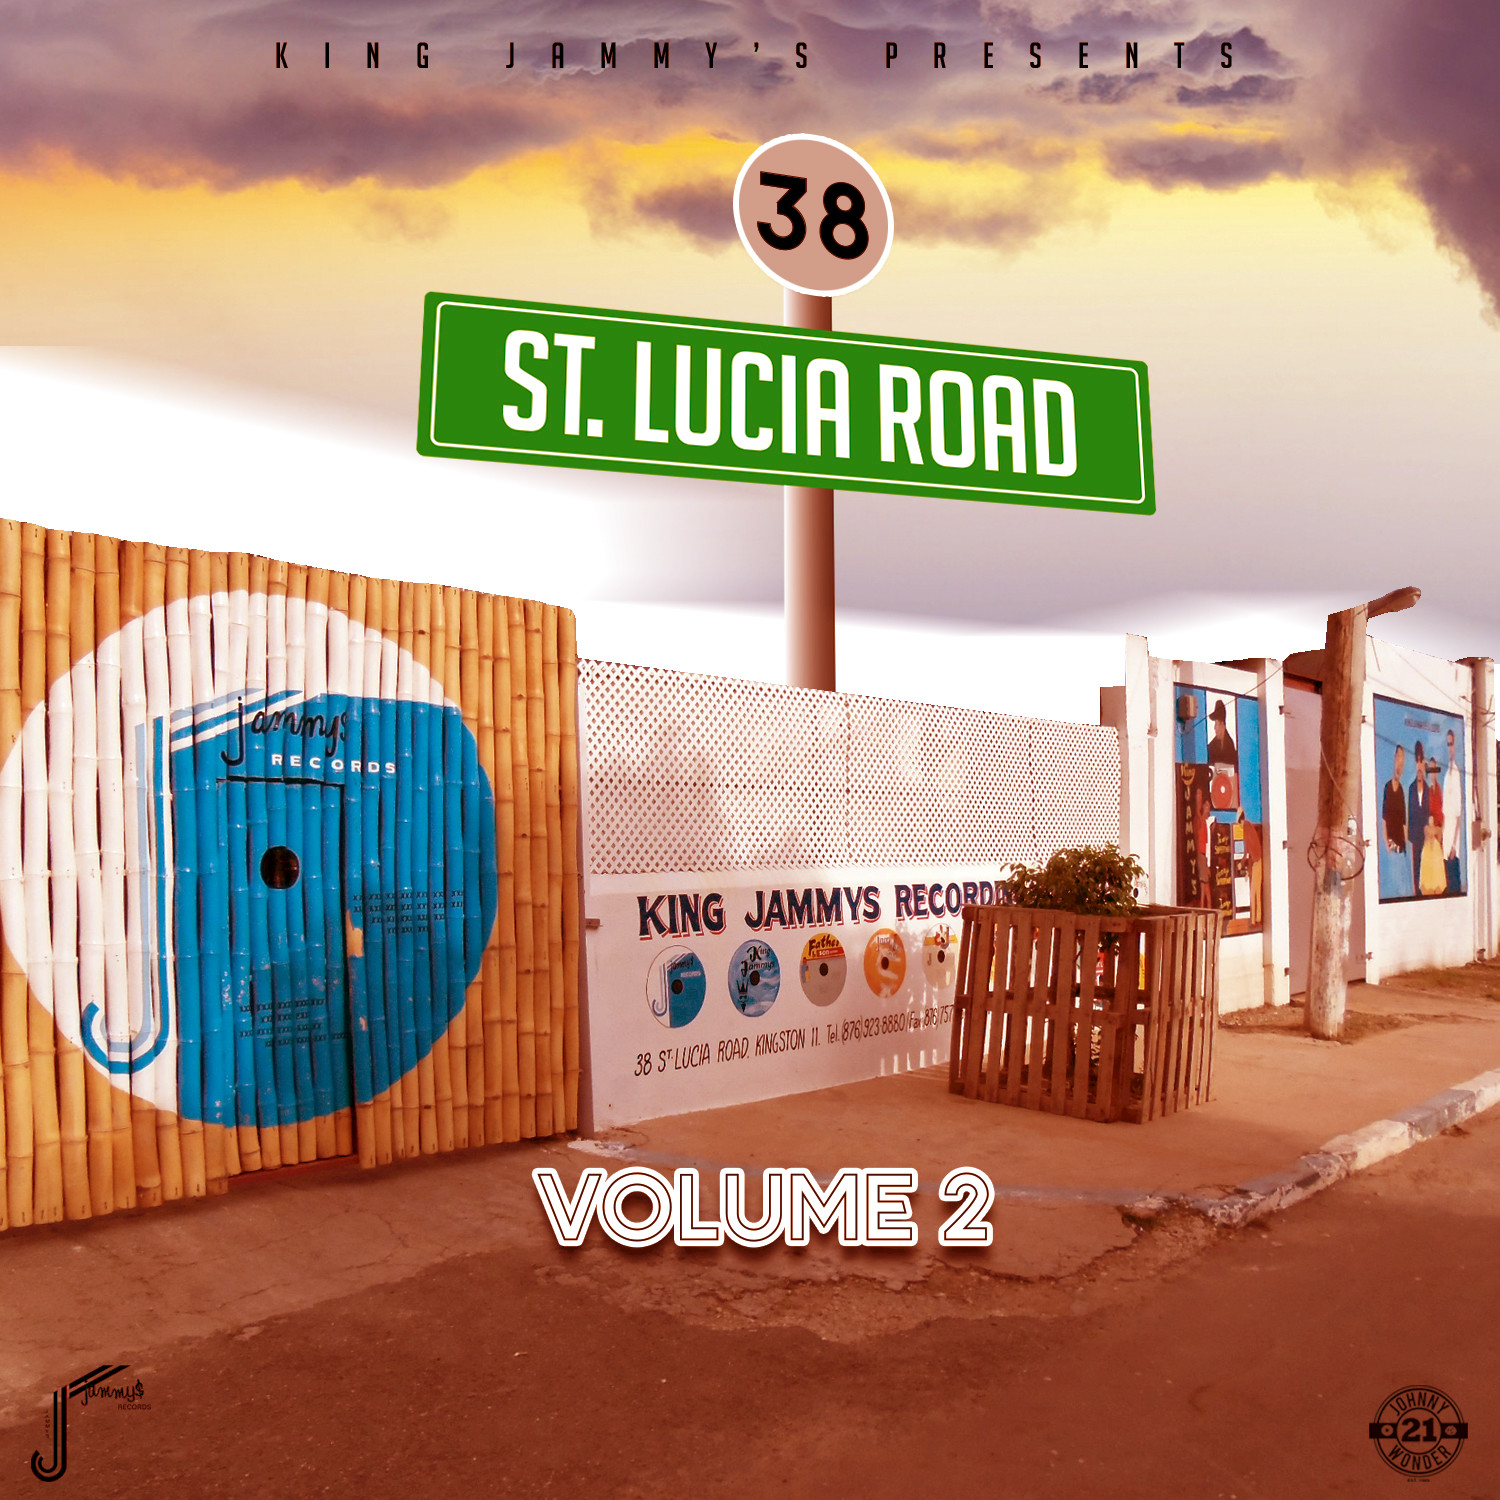 King Jammys: 38 St. Lucia Road, Vol. 2